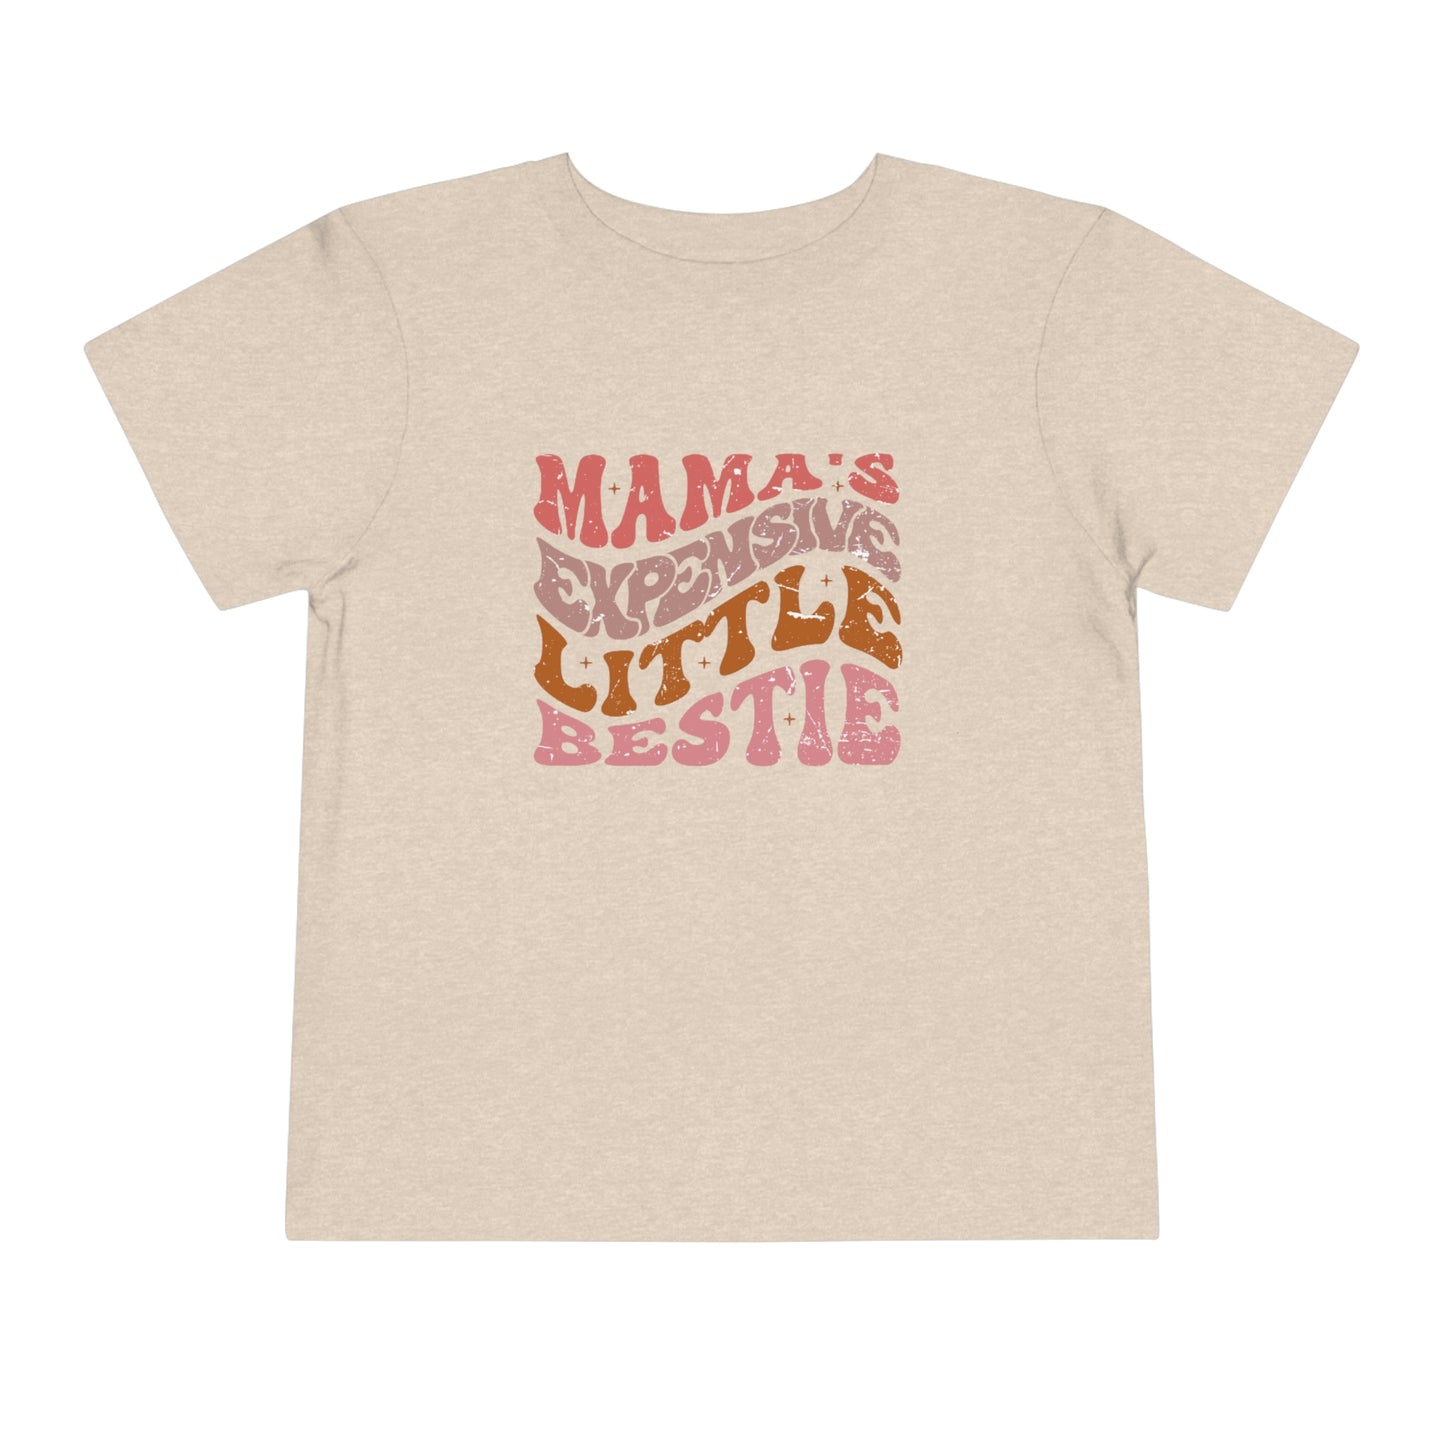 "Mama's Expensive Little Bestie" Toddler Short Sleeve Tee (2T-5T)